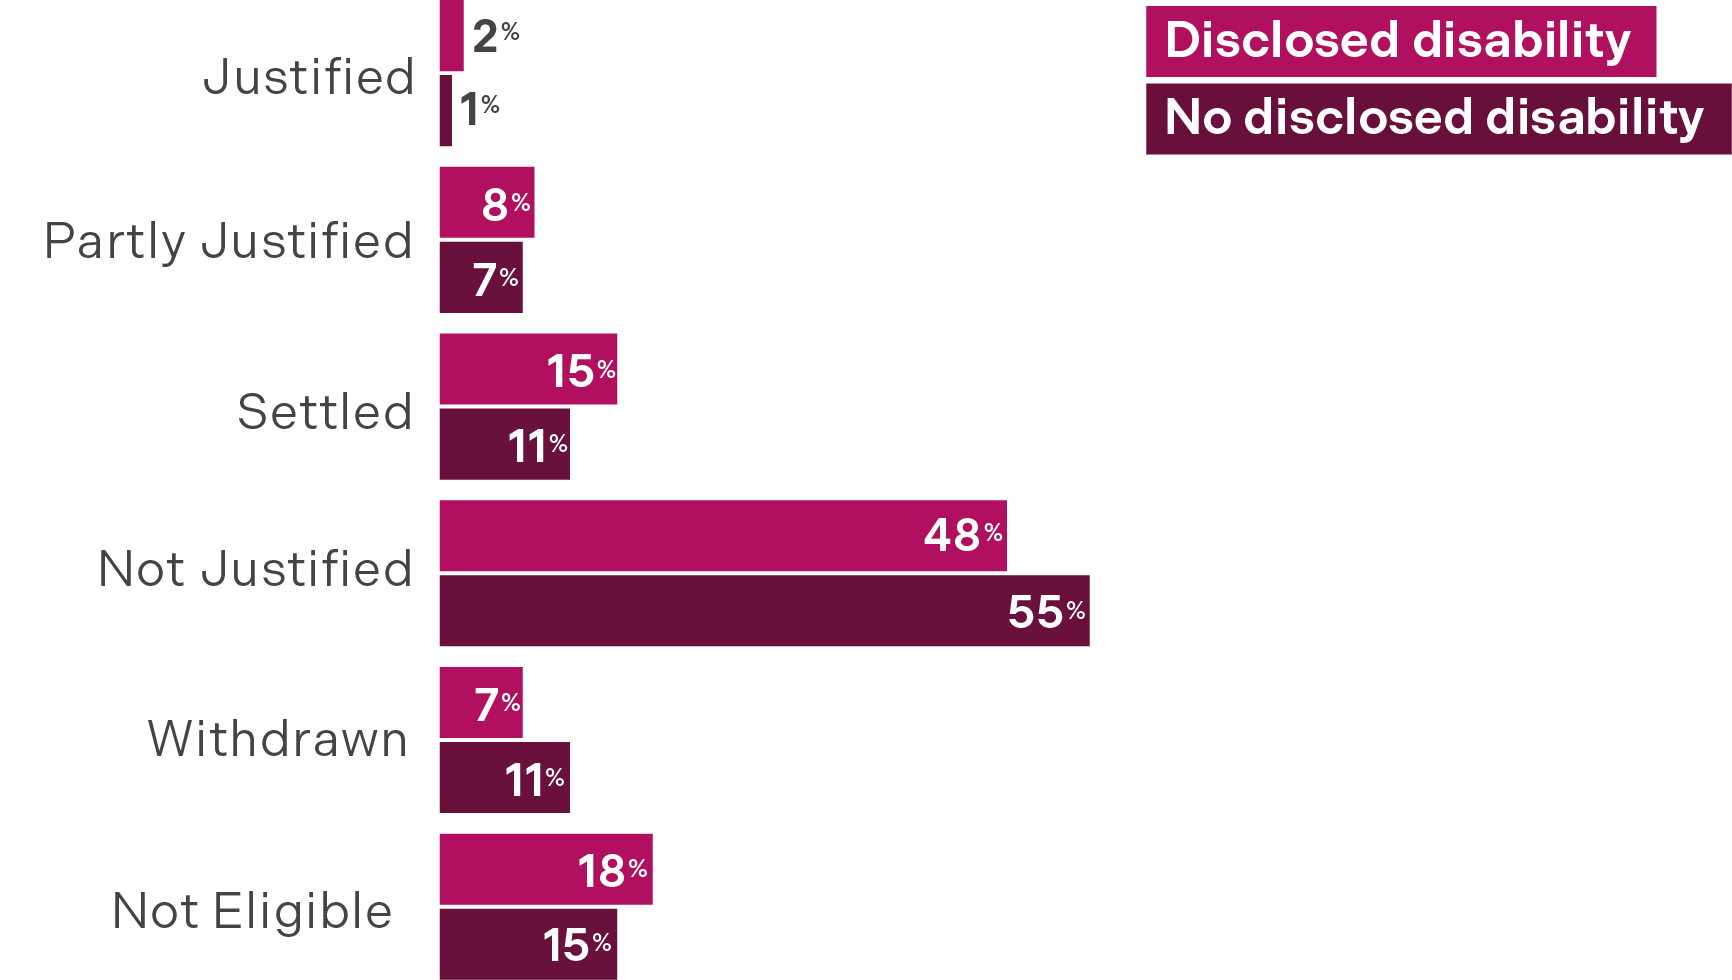 Bar chart comparing the outcomes of complaints for students with a disclosed disability against those who have no disclosed disability